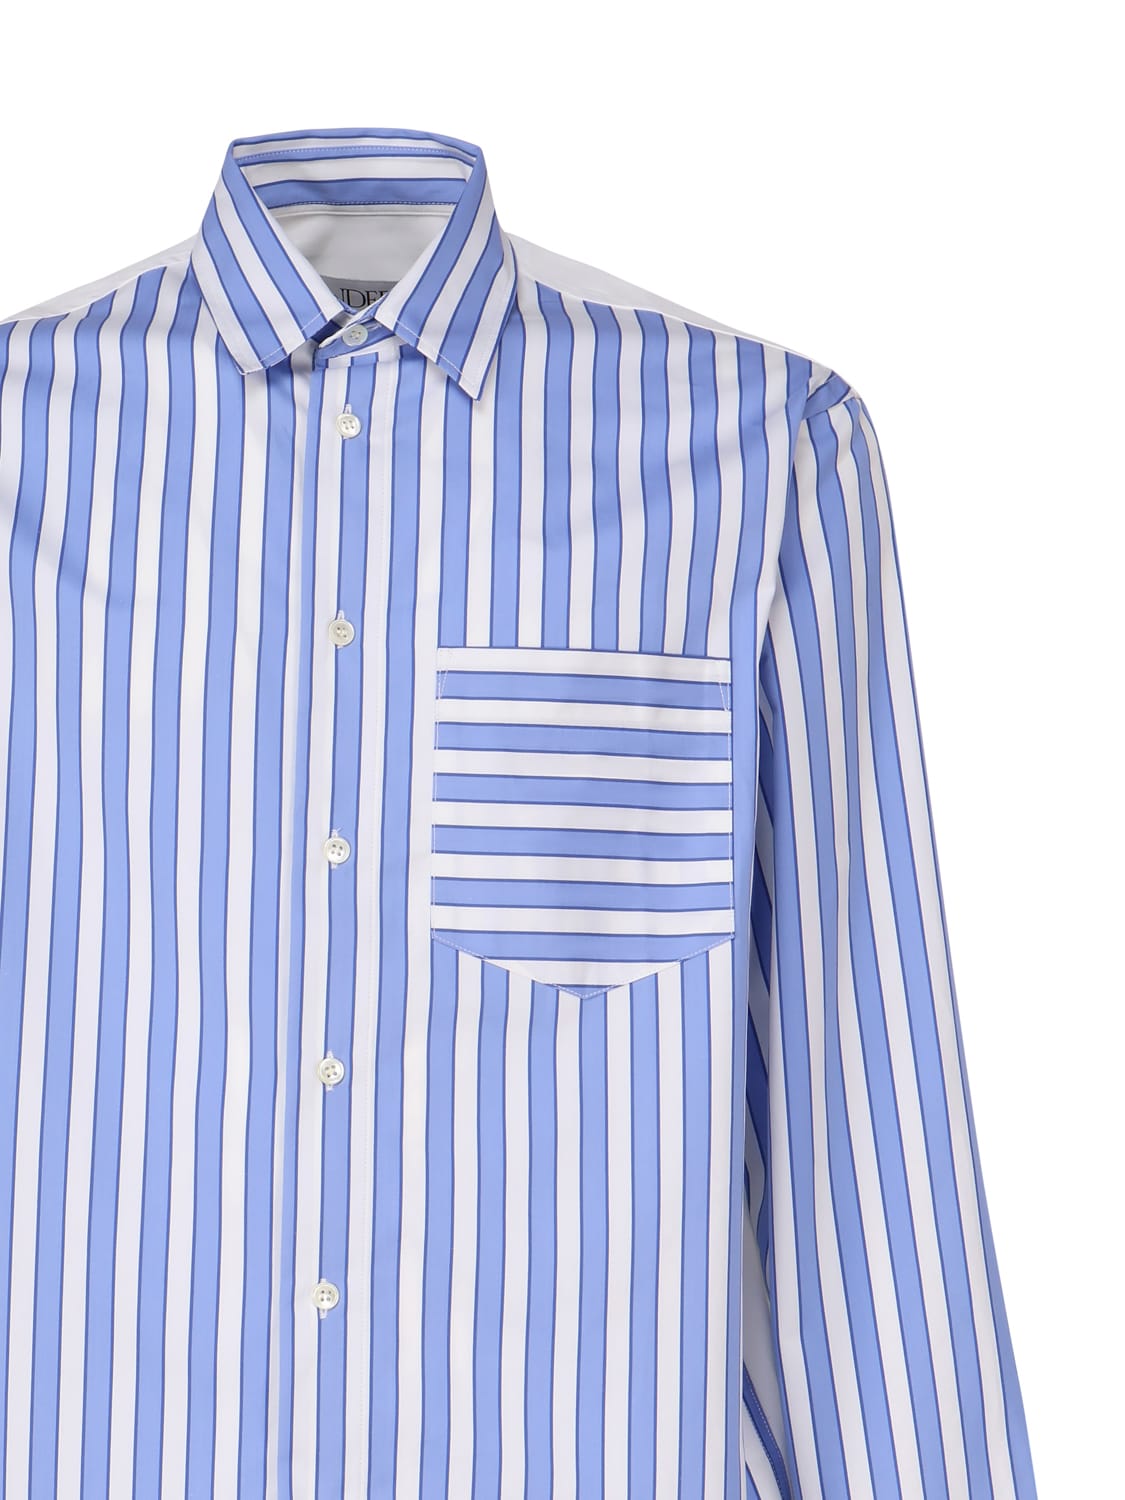 Shop Jw Anderson Striped Shirt With Insert Design In Light Blue/white